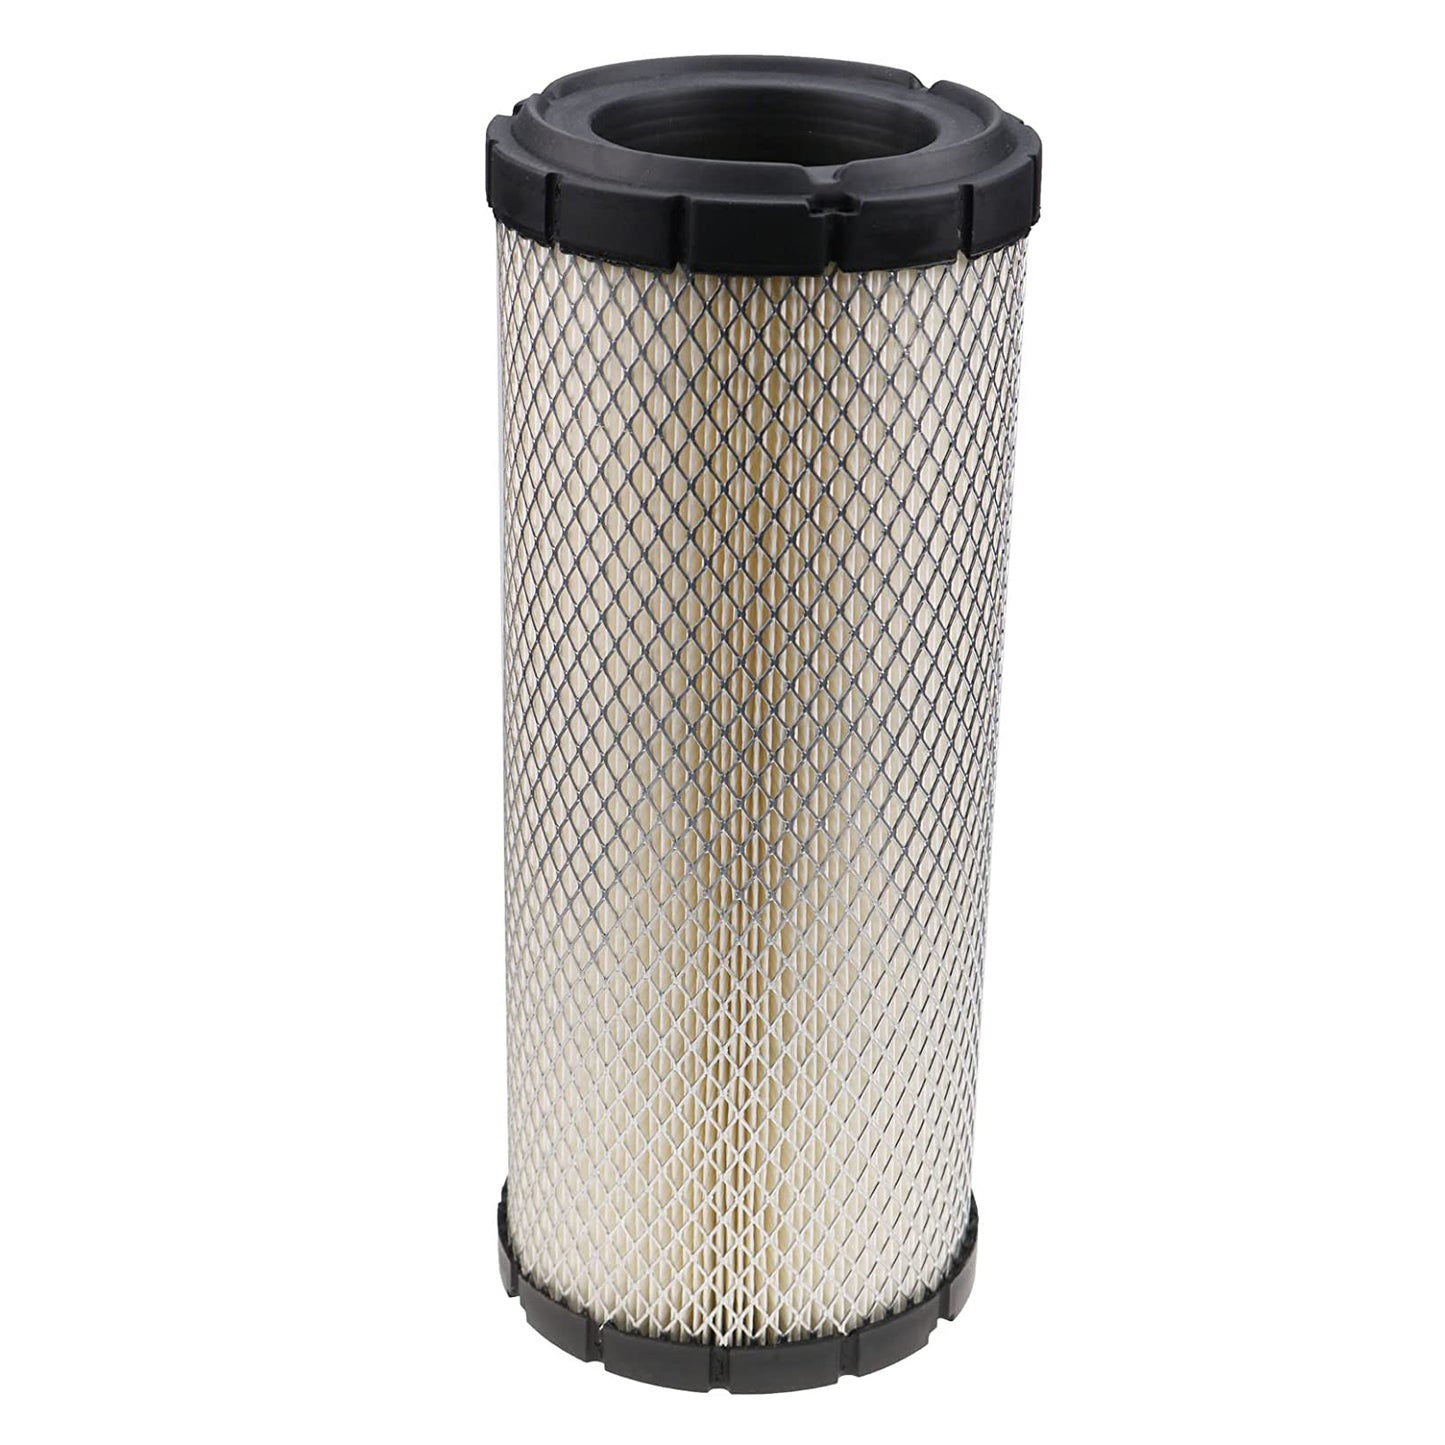 New 59800-26110 Outer Air Filter Compatible with Kubota KX080-3 KX080-4 L4740 L5040 L5240 L5740 M5040 M59 M6040 M6060 M6800 M7040 M7060 SQ-3350 SSV65 SSV75 SVL75 SVL75-2 SVL75C